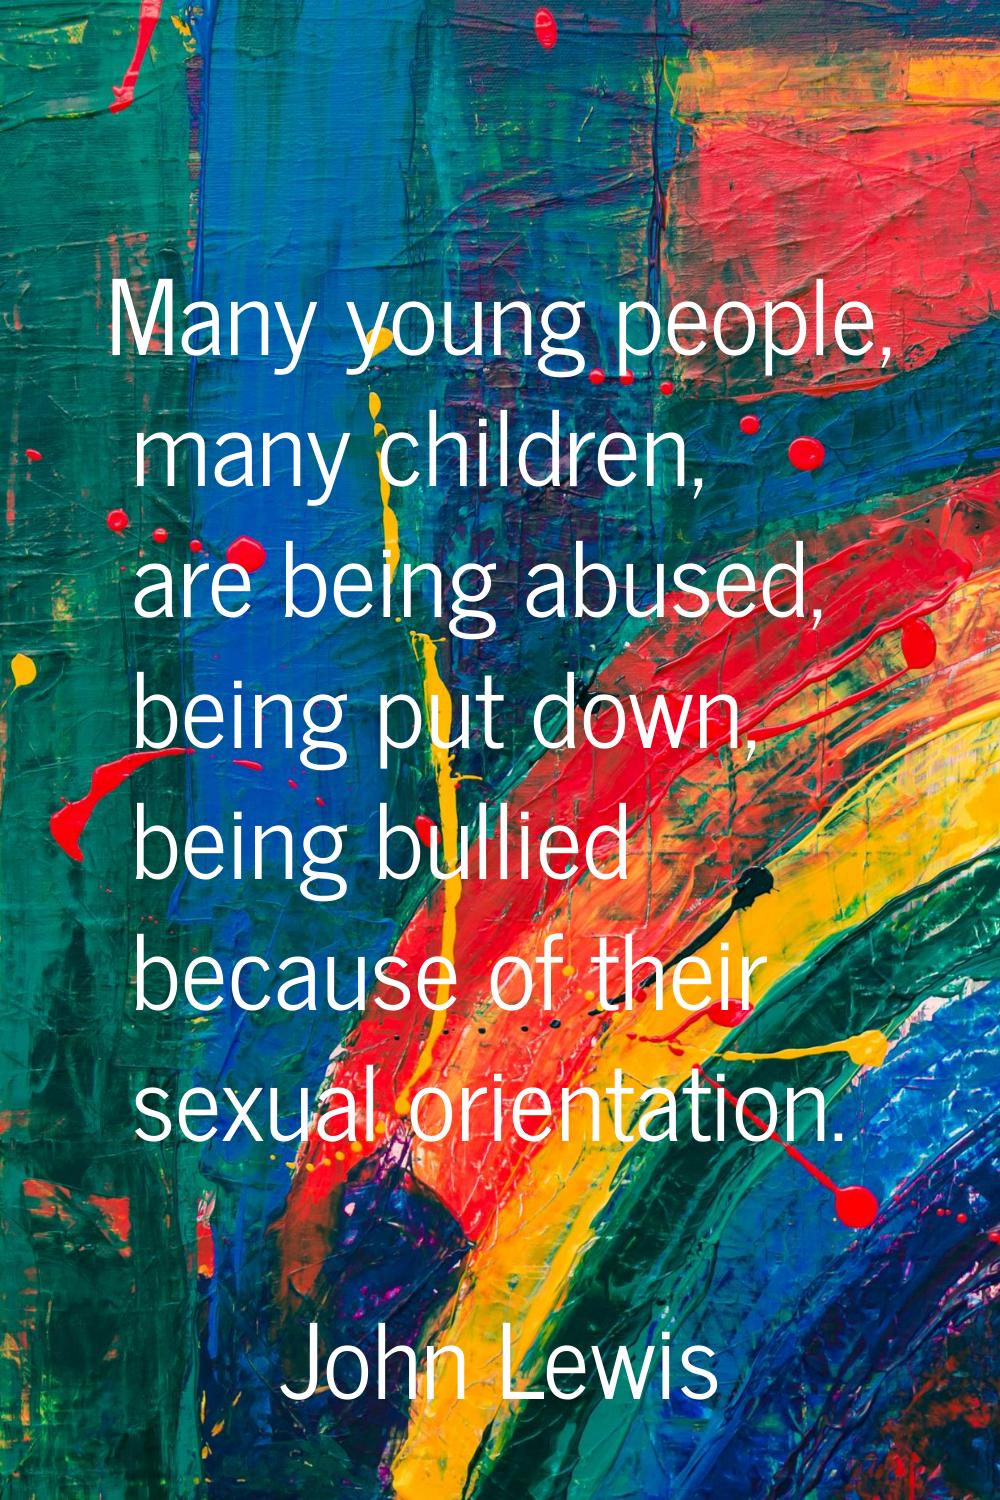 Many young people, many children, are being abused, being put down, being bullied because of their 